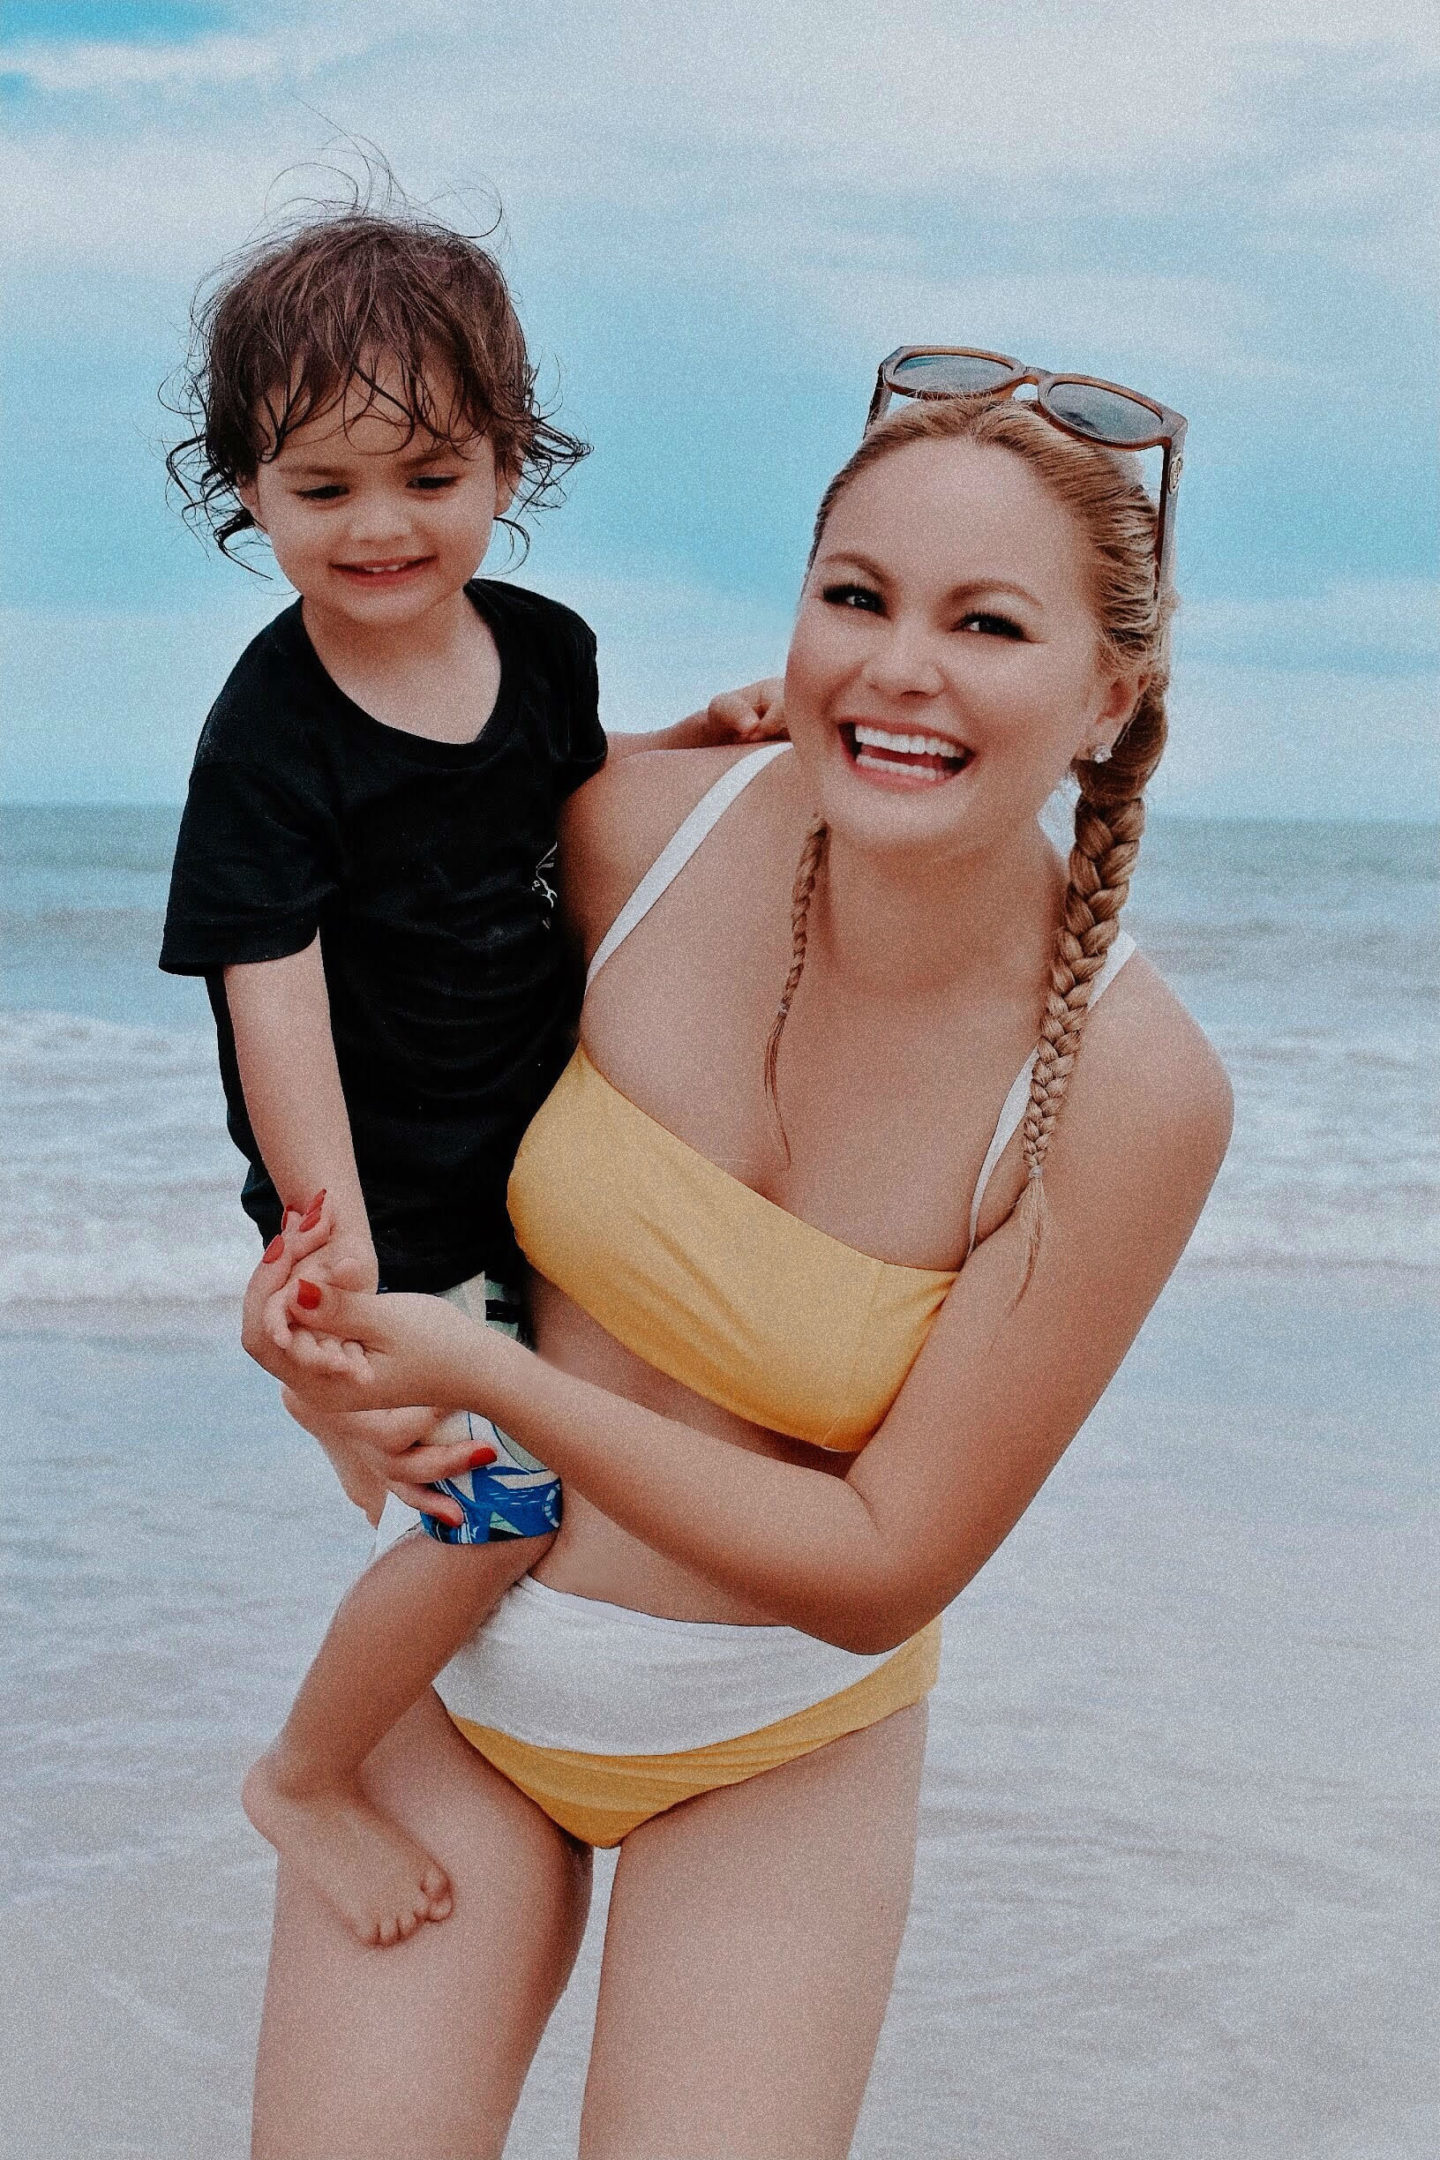 family-time-at-the-beach-florida-vanessa-lambert-whatwouldvwear